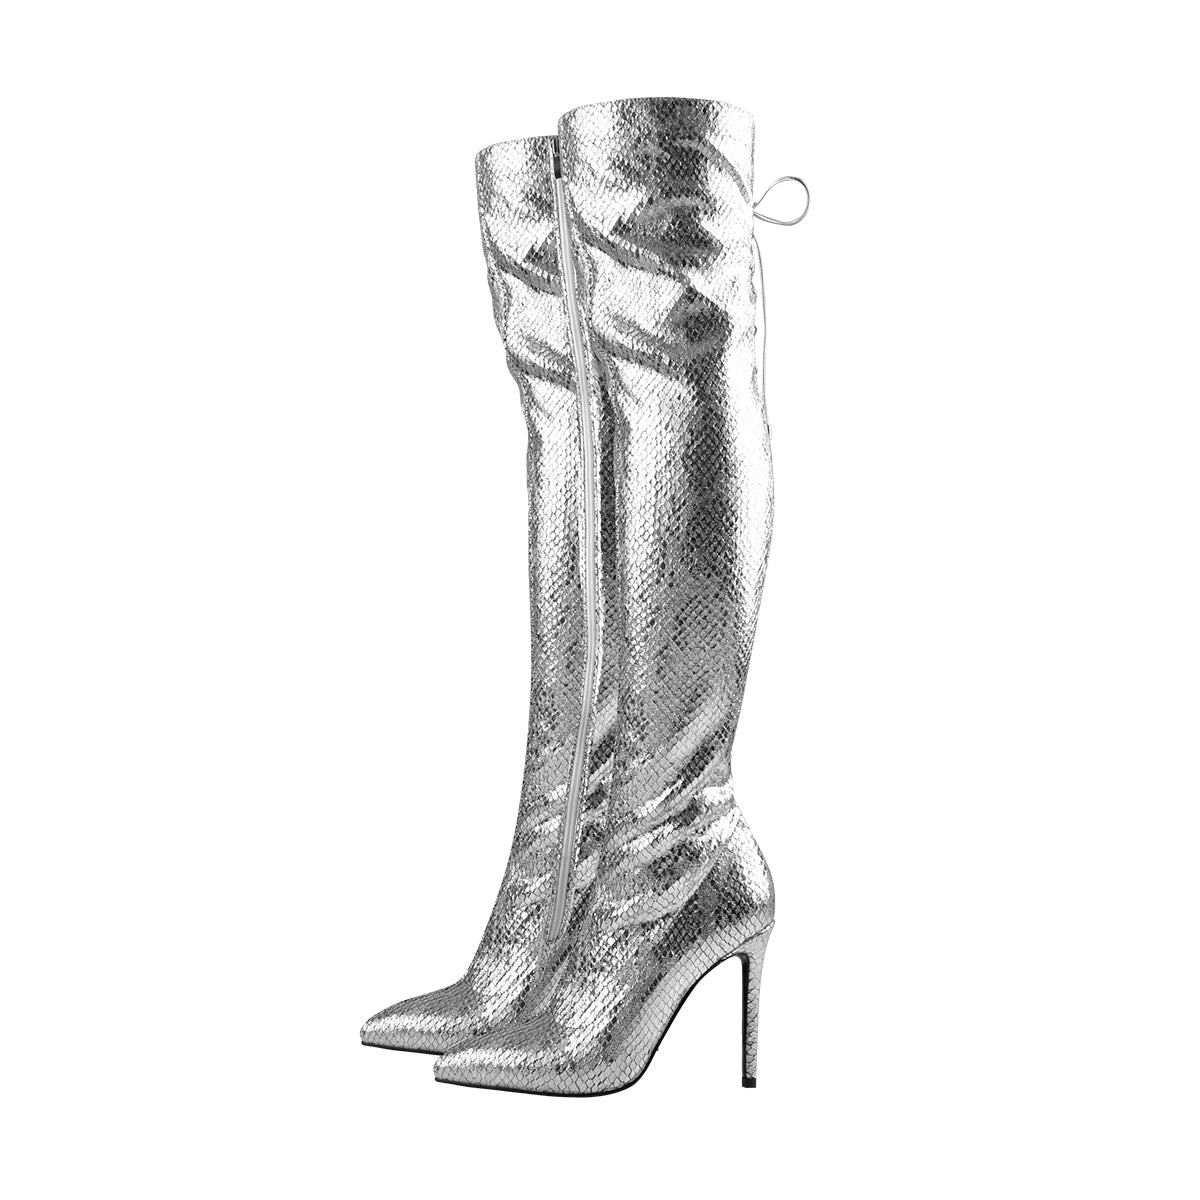 Pointed Toe Metallic Silver Thigh High Bootie | Onlymaker | Reviews on ...